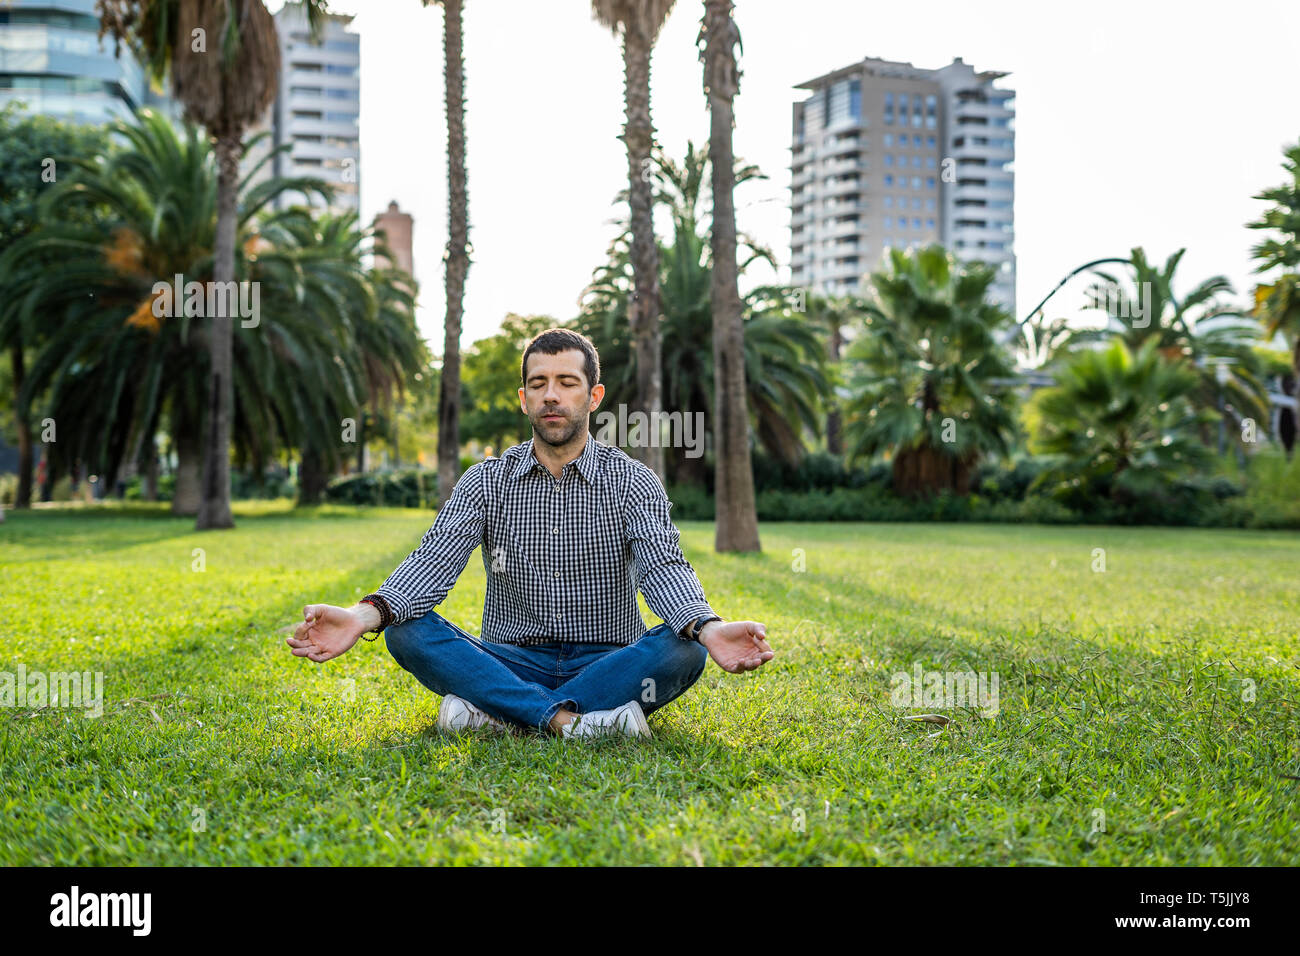 Man sitting on meadow in city park doing yoga exercise Stock Photo